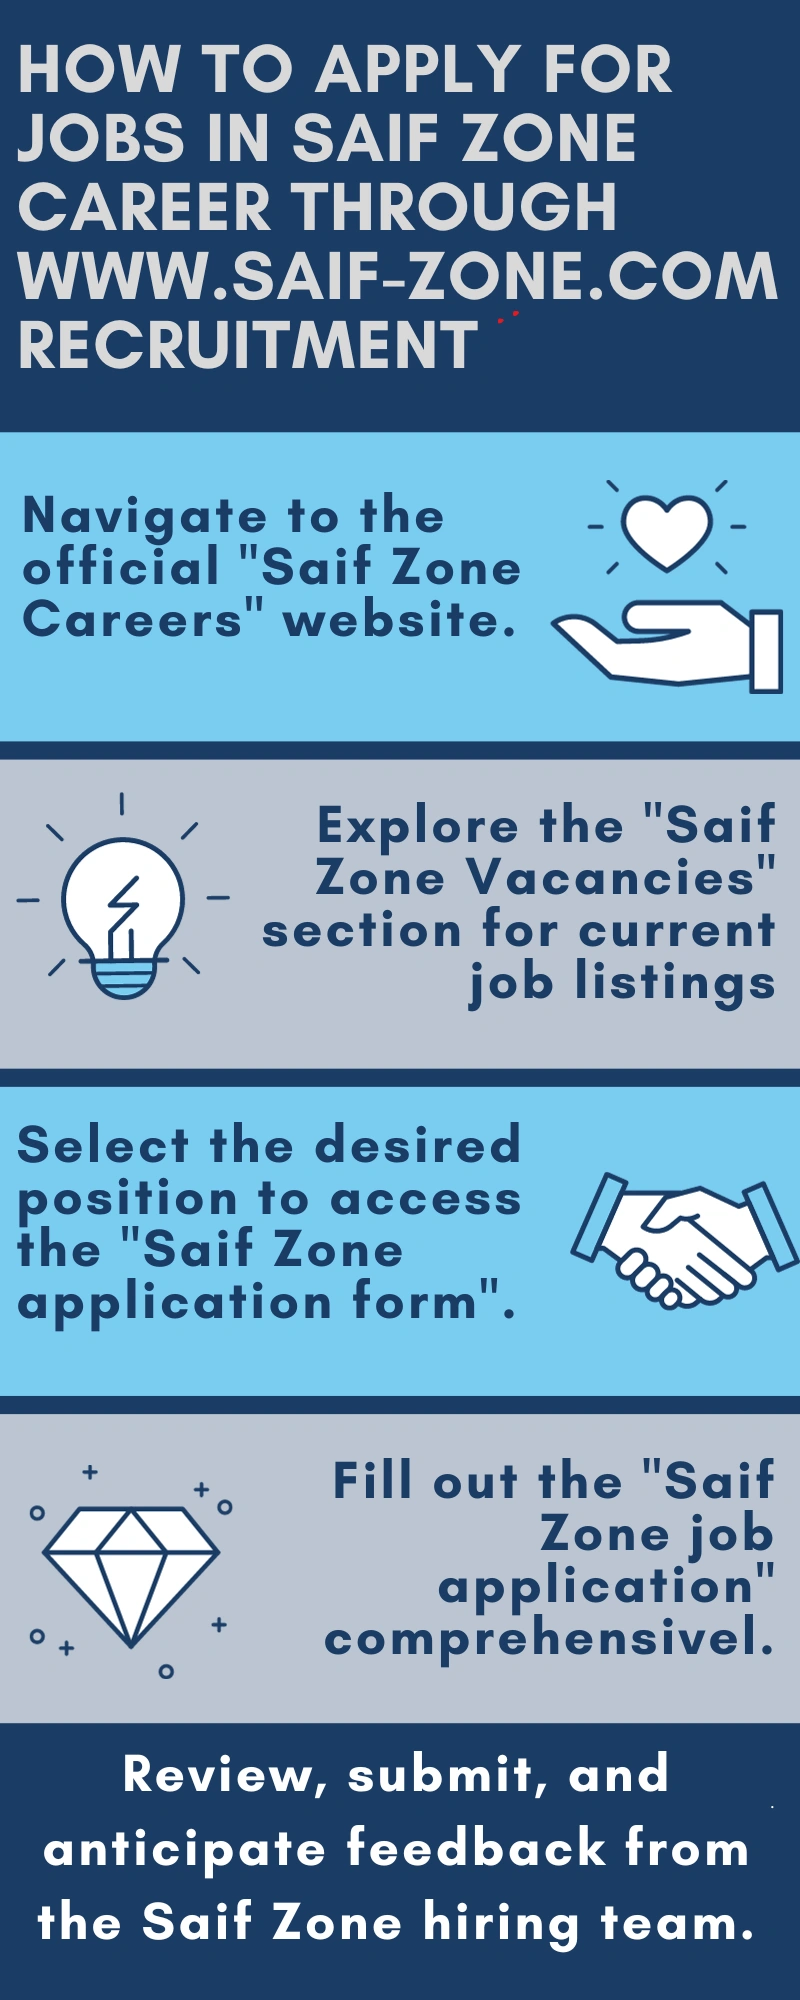 How to Apply for Jobs in Saif Zone Career through www.saif-zone.com recruitment?